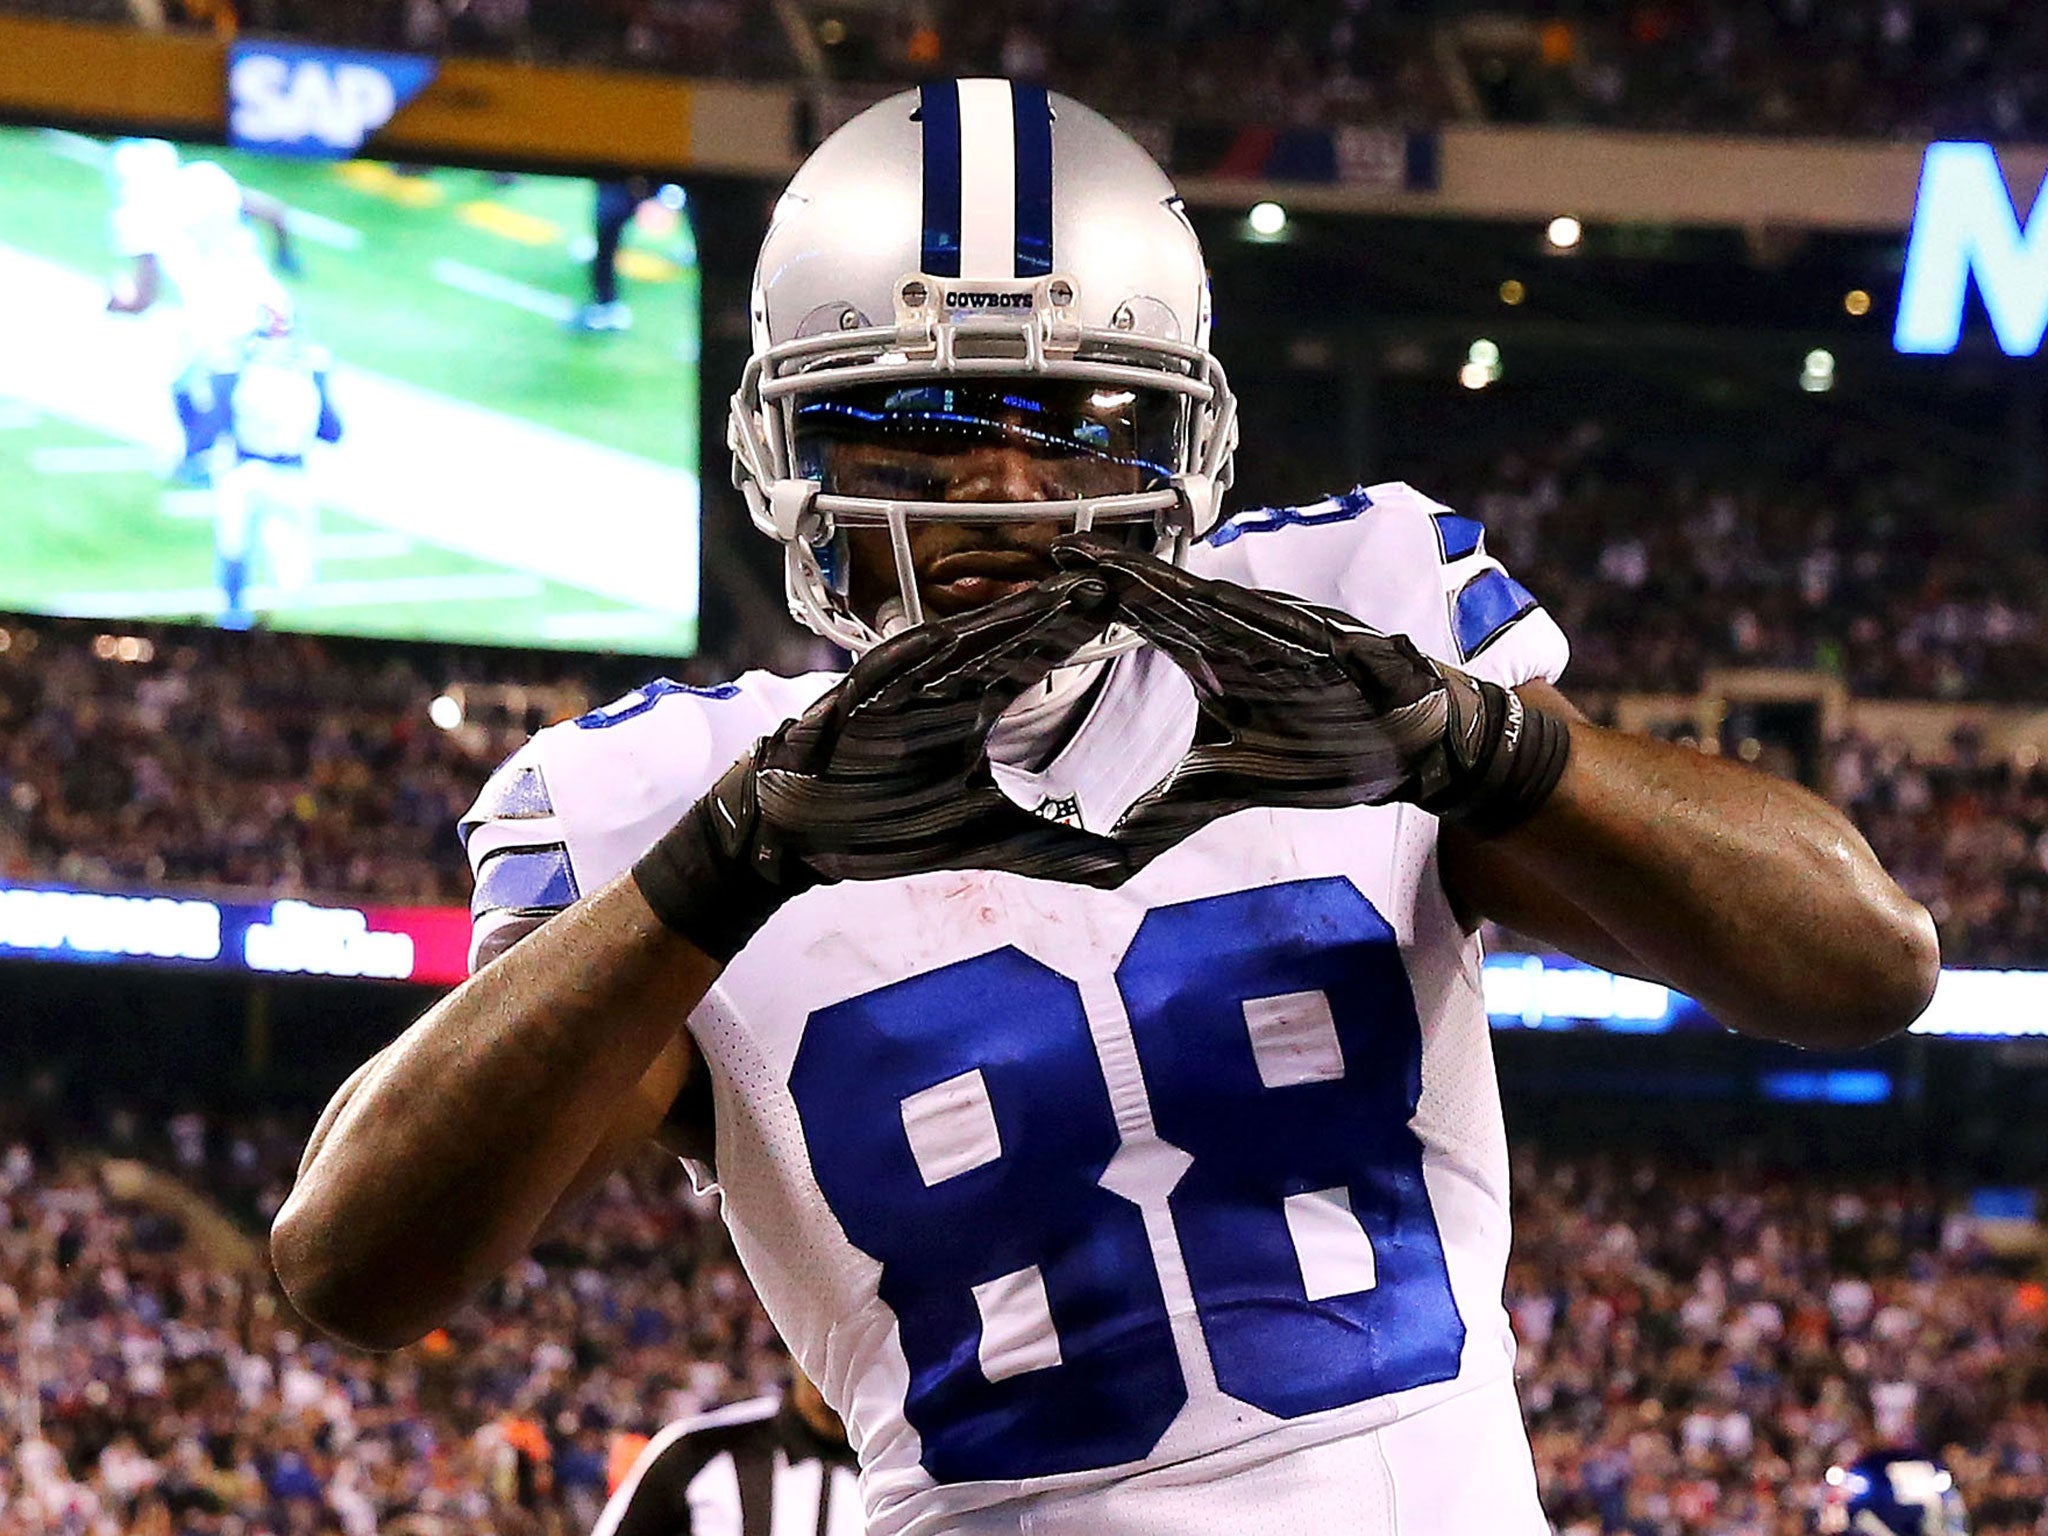 Dez Bryant caught two touchdown passes from Tony Romo during Dallas' win over the New York Giants